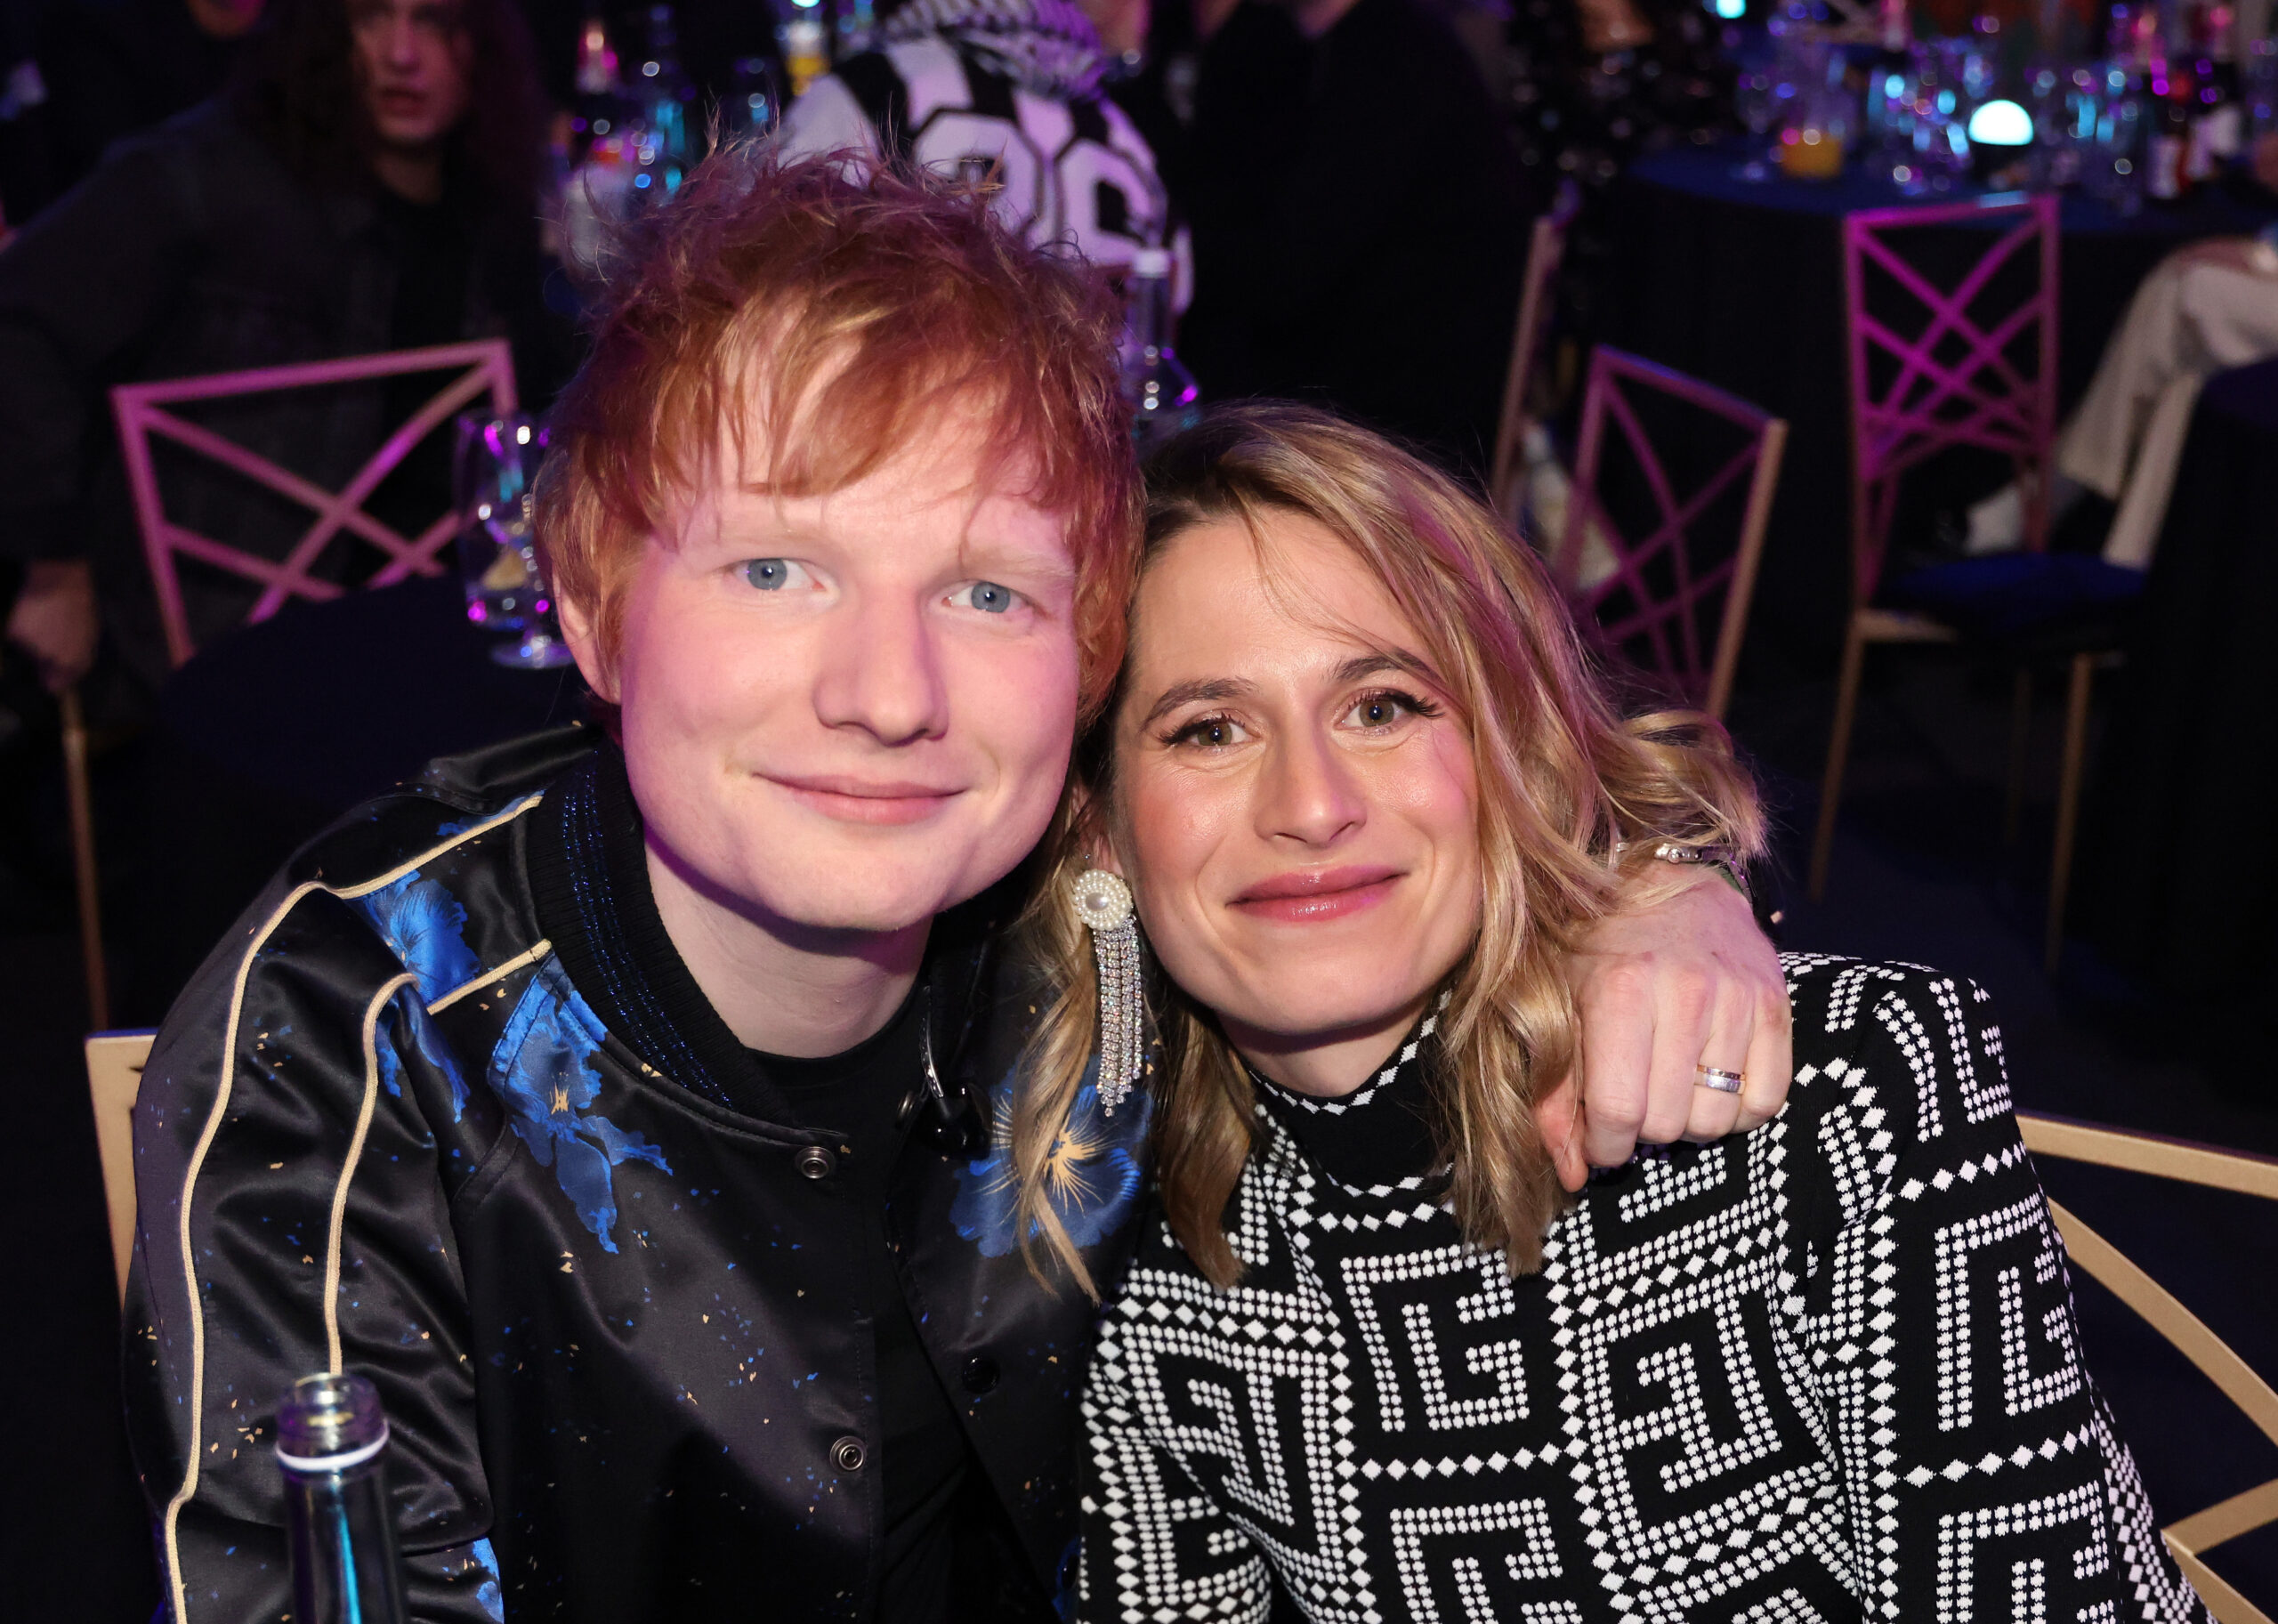 Singer Ed Sheeran Reveals His Wife Was Diagnosed With A Tumor While Pregnant, Waited Until Birth To Pursue Treatment